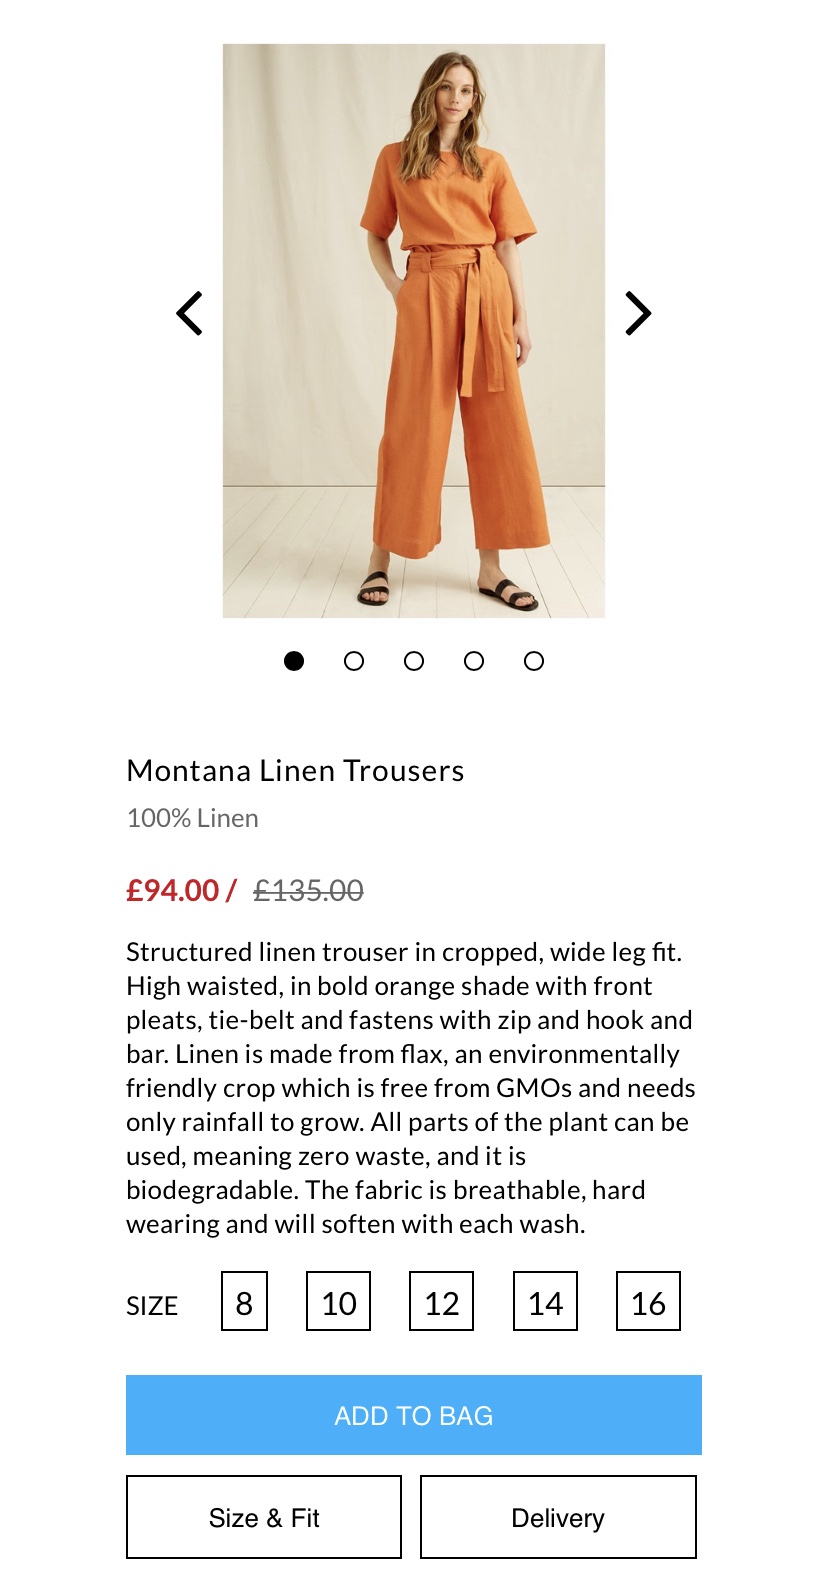 People Tree Summer Sale upto 70% off| Montana Linen Trousers